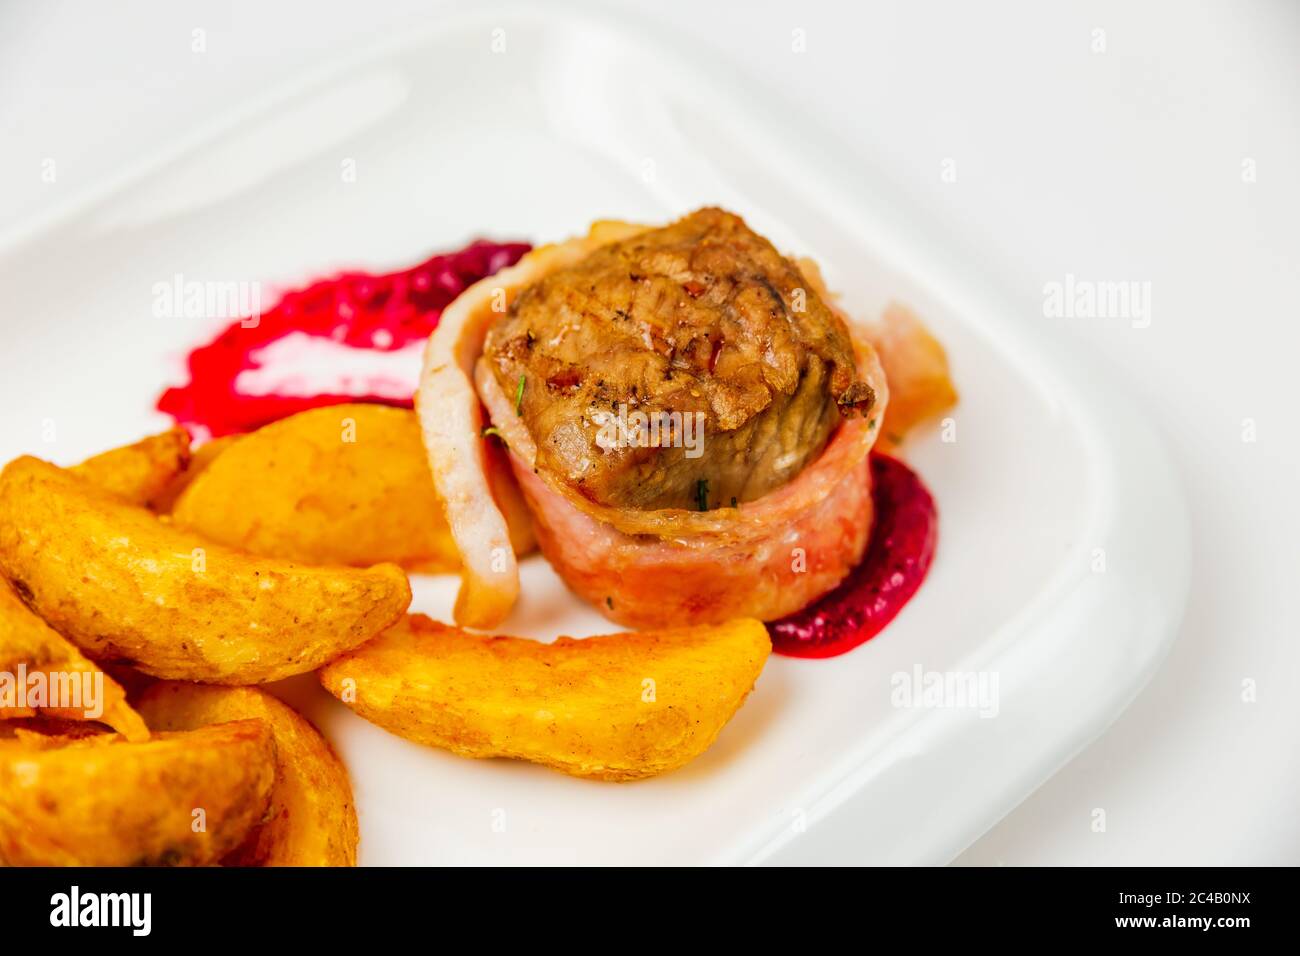 Fillet mignon rolled in bacon and baked in oven with berry sauce. Potato for garnish. Close-up photo Stock Photo